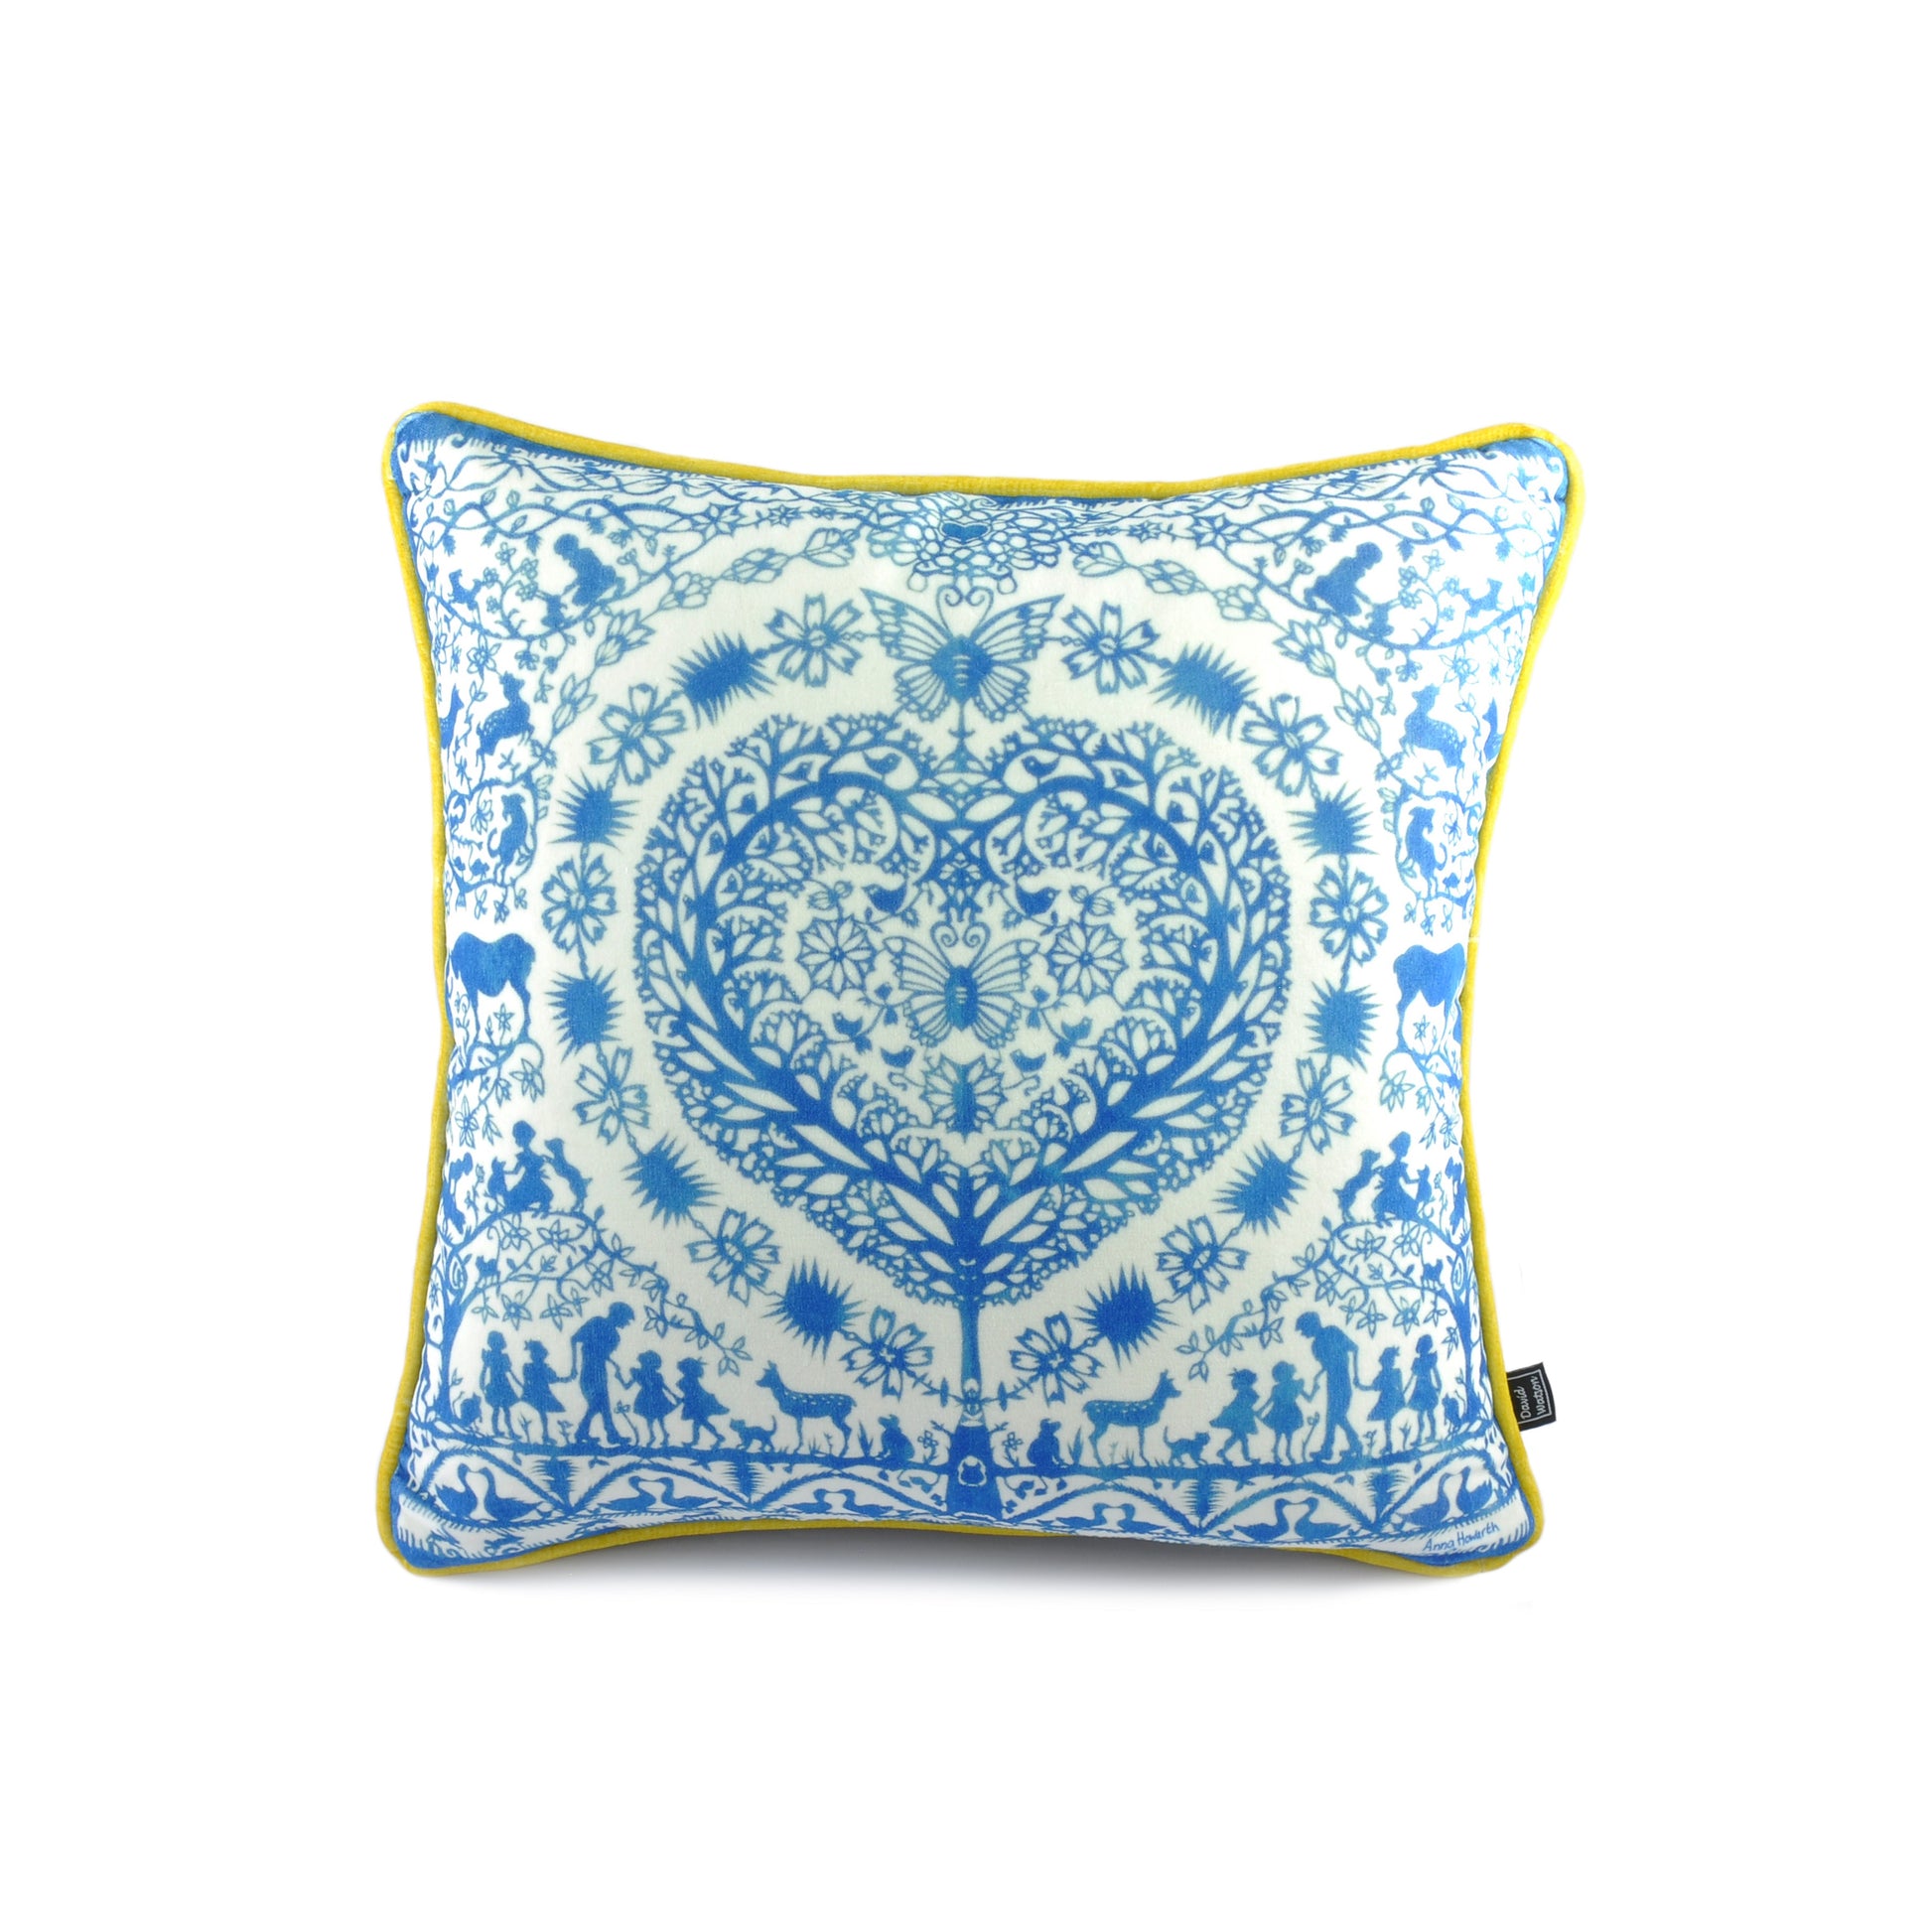 Luxury filled duck feather cushion with cotton velvet cover with an blue and white Anna Howarth design of intricate paper cutting design and piped edging.